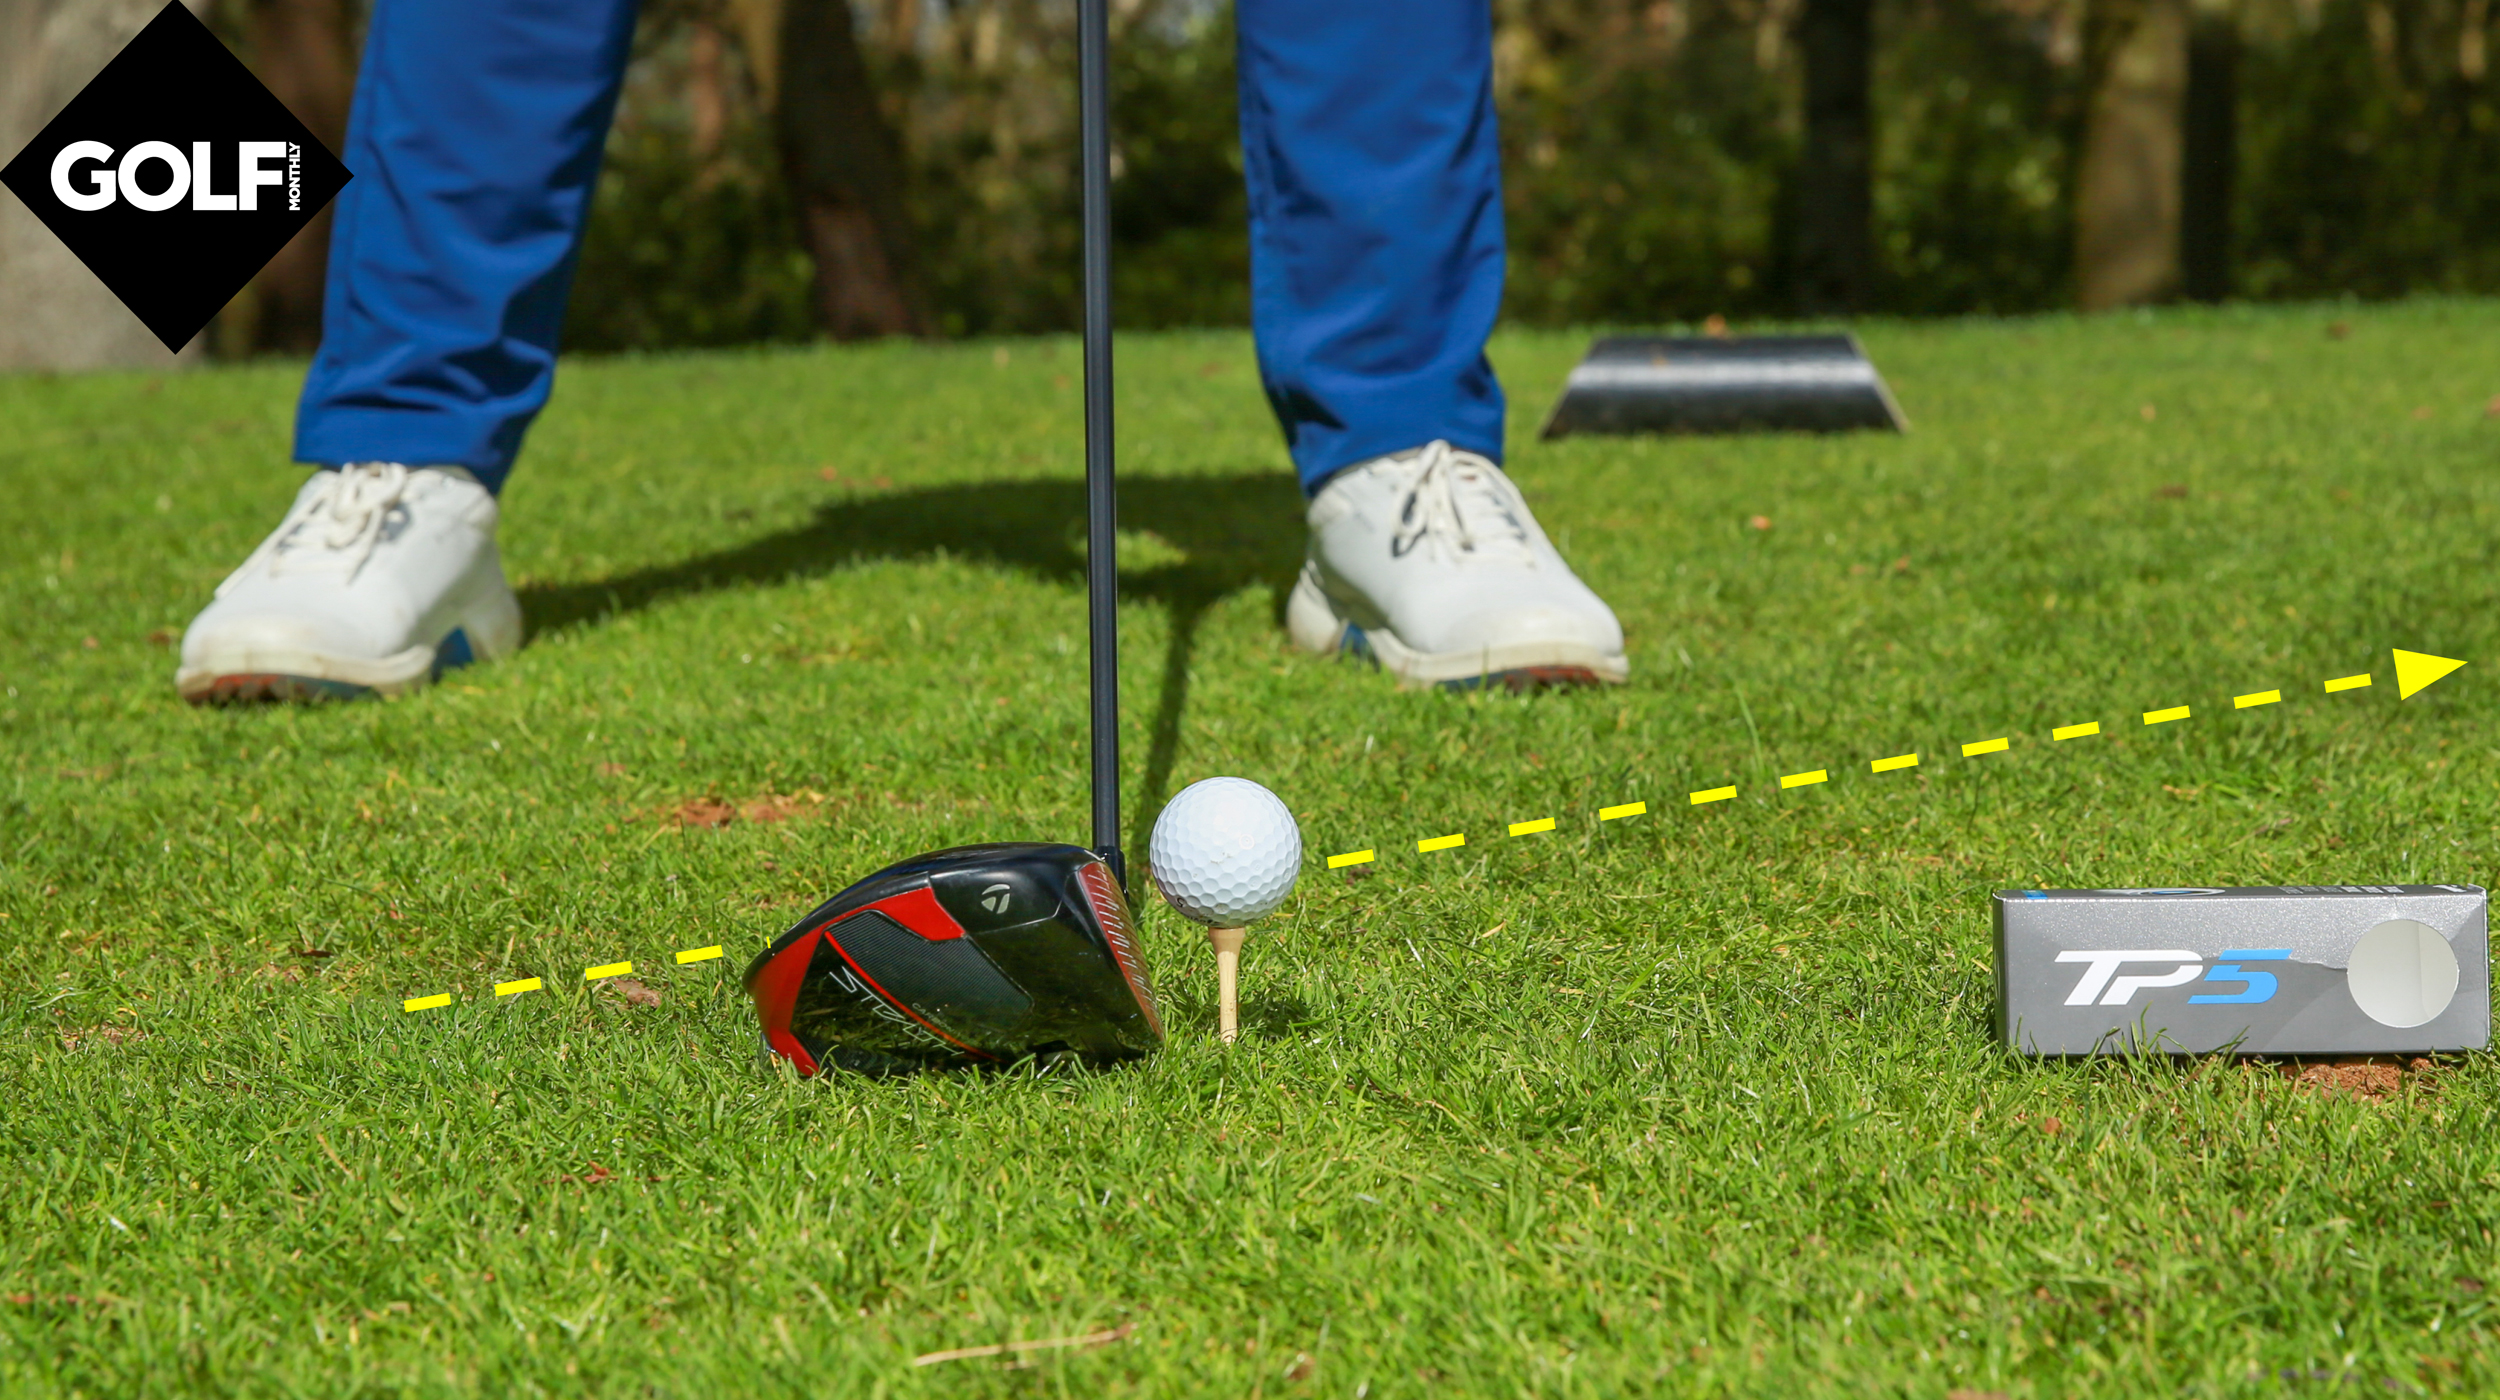 How To Avoid Creating Too Much Spin With Your Driver | Golf Monthly